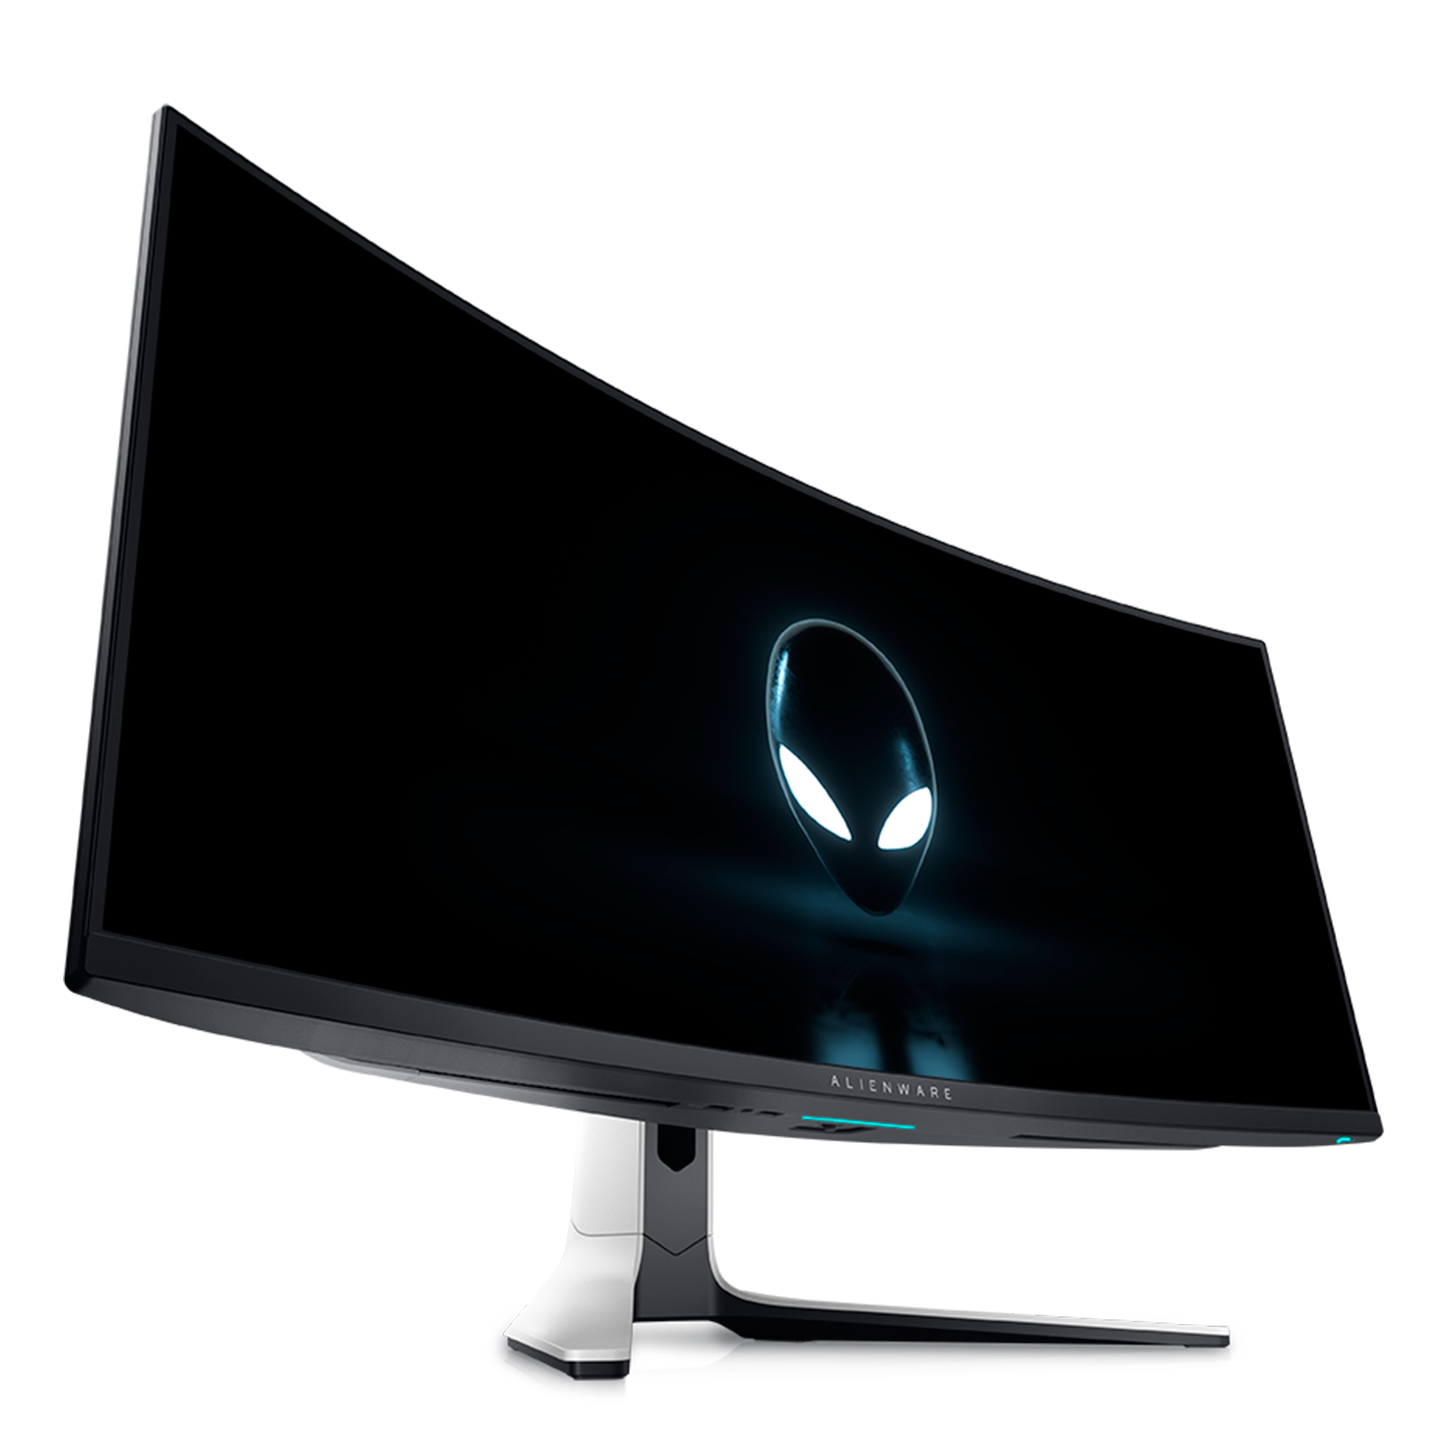 prod-449552-monitor-alienware-aw3423dw-1440x1440.png